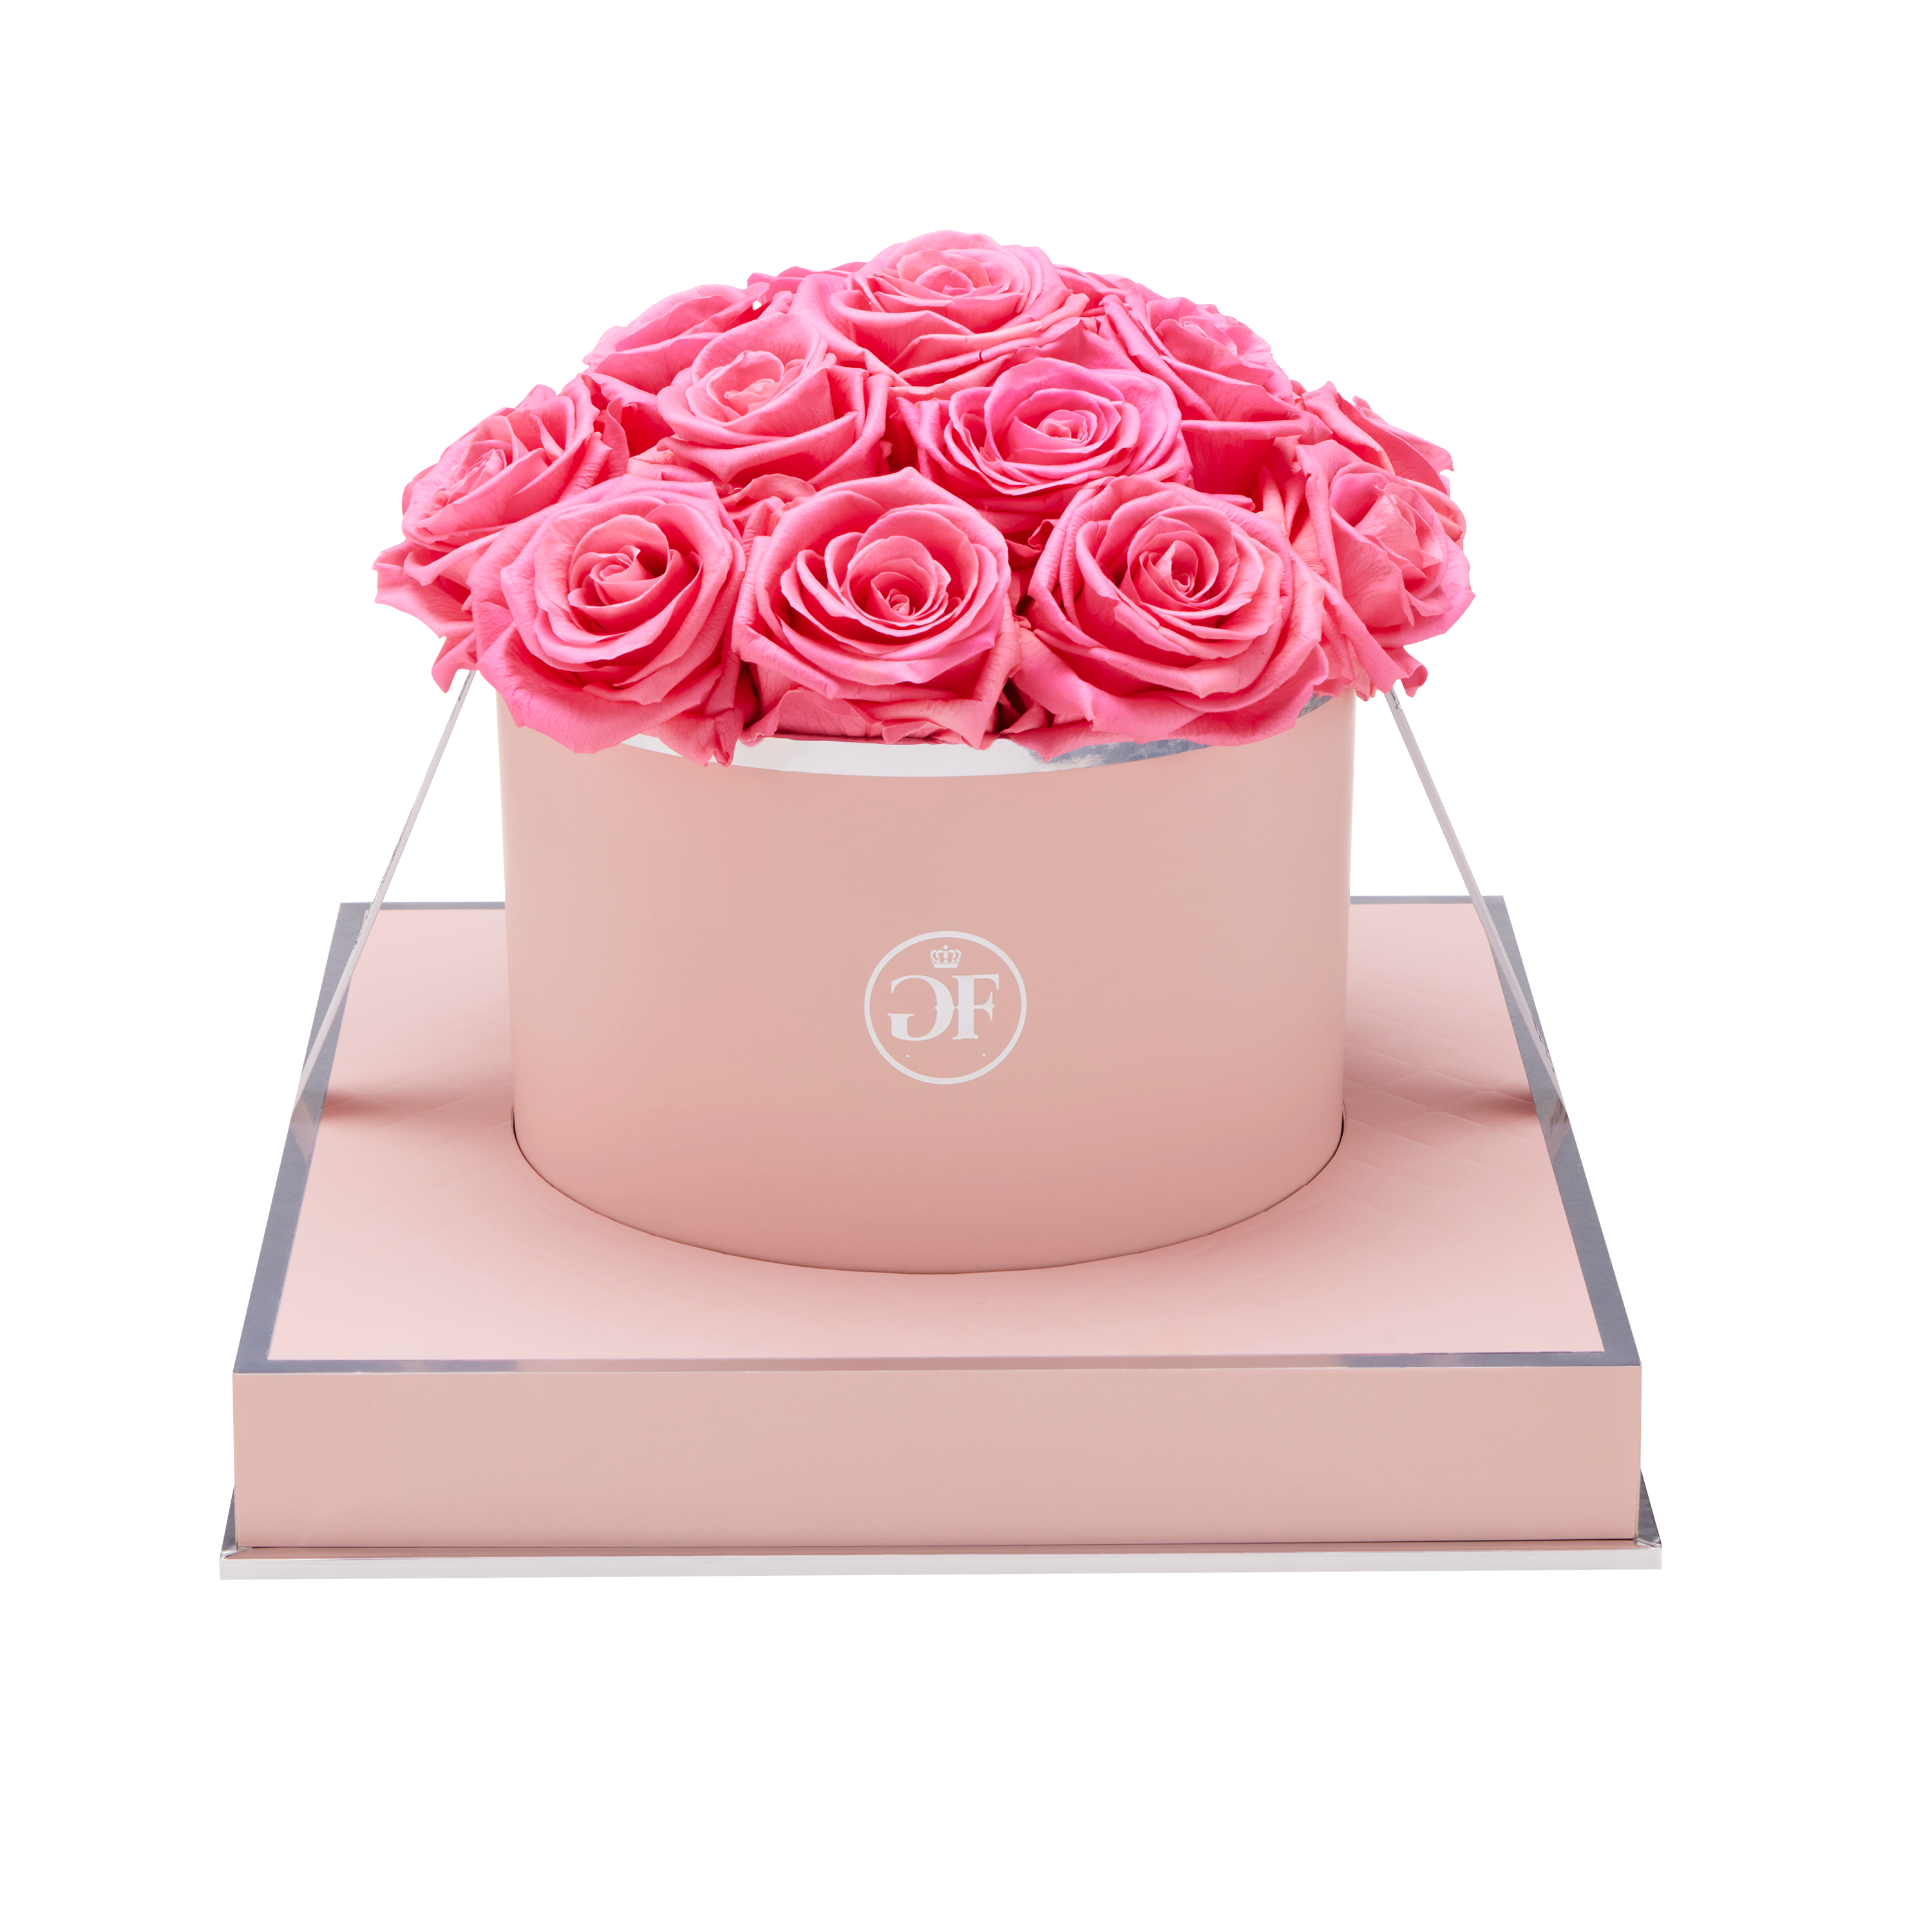 Preserved Pretty in Pink Roses in a Round Box